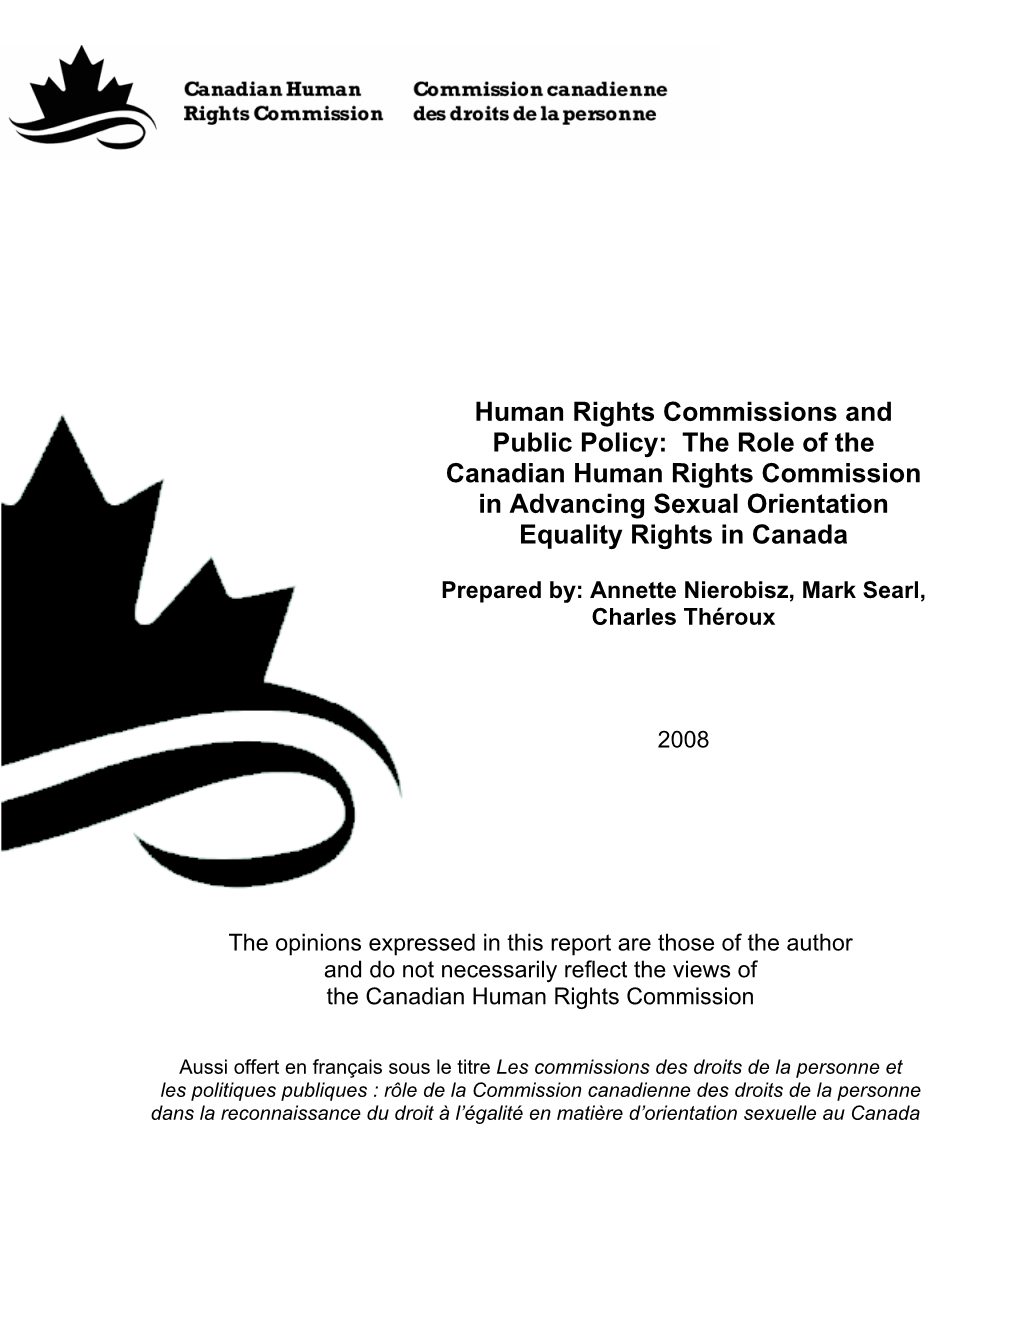 The Role of the Canadian Human Rights Commission in Advancing Sexual Orientation Equality Rights in Canada